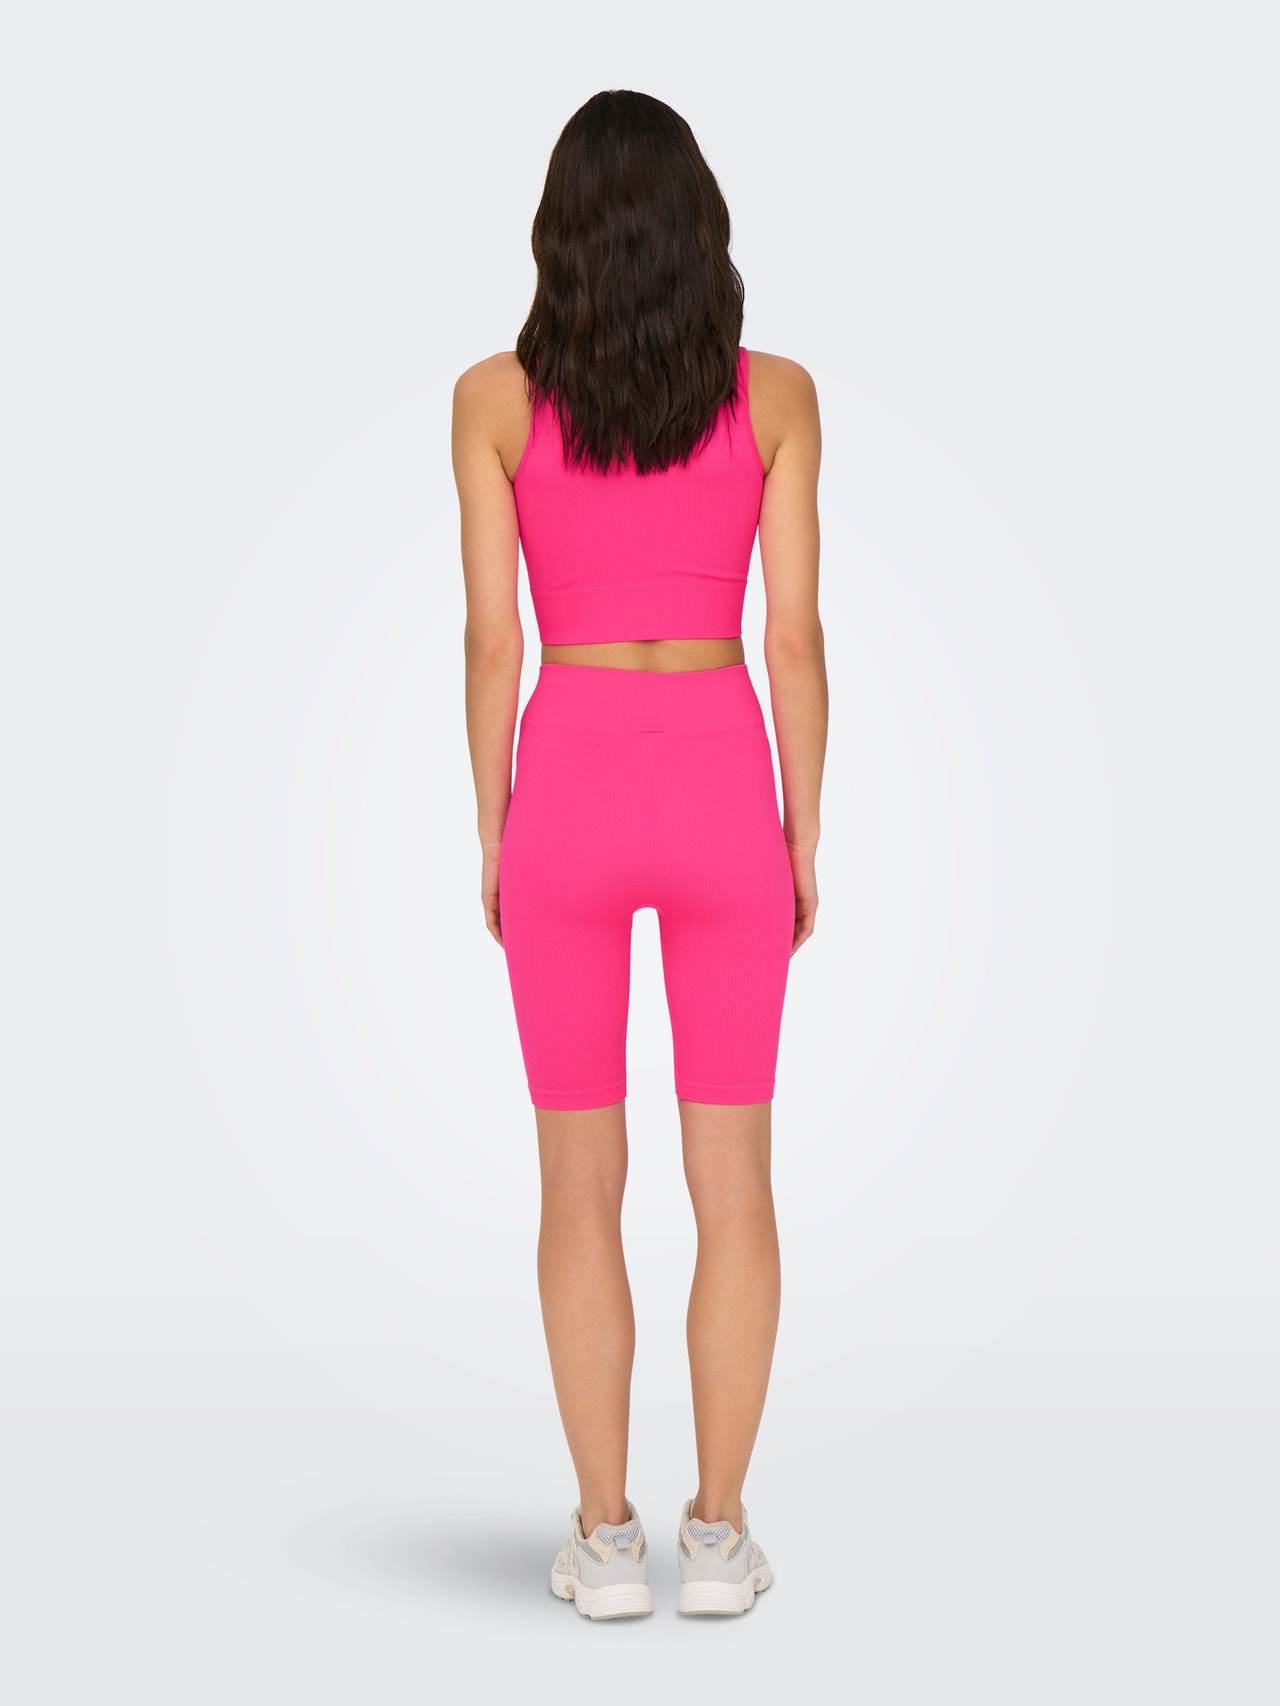 ONLY Seamless Sports shorts -Pink Glo - 15253714